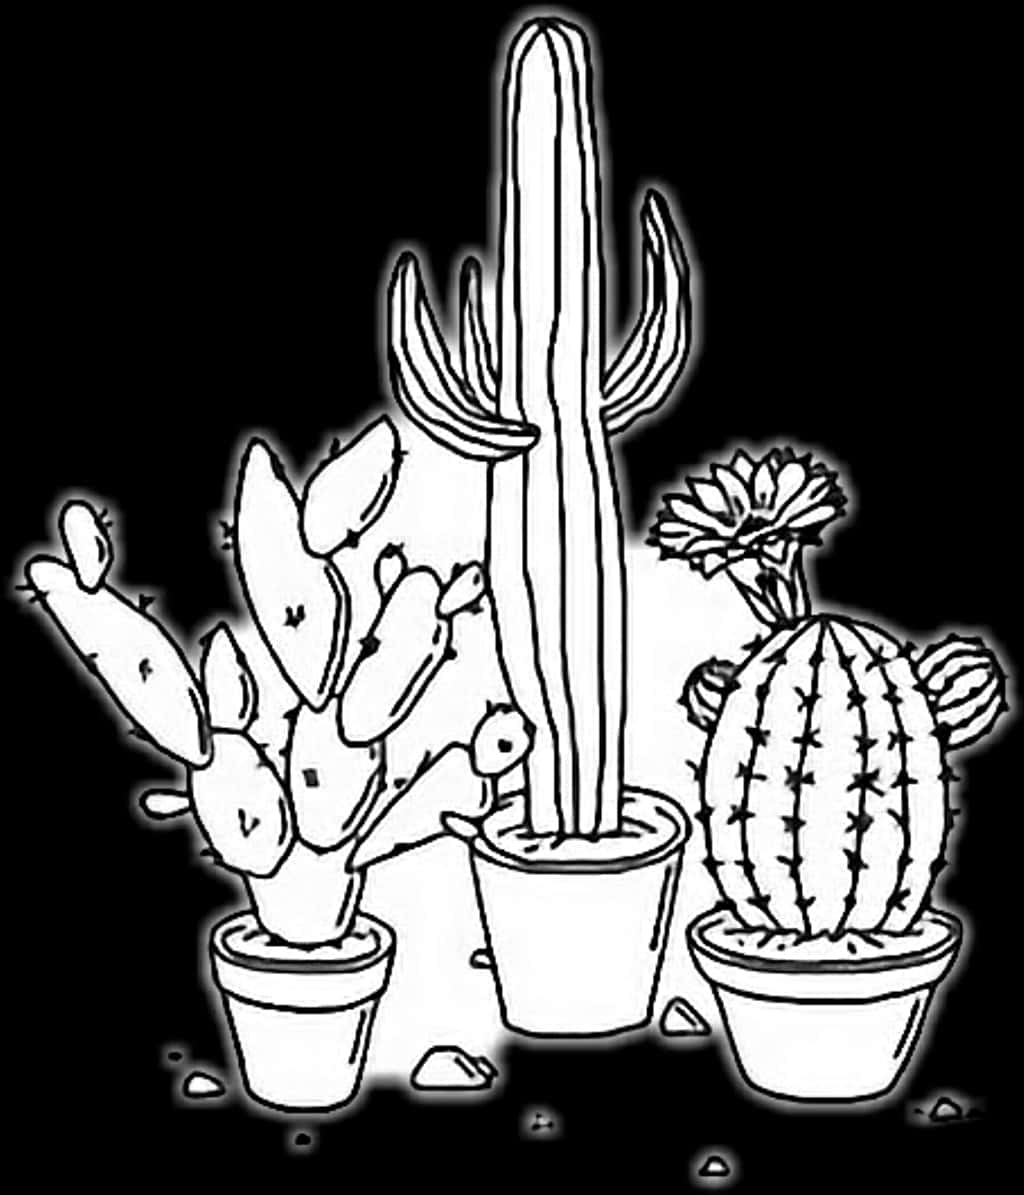 A Group Of Cactus In Pots